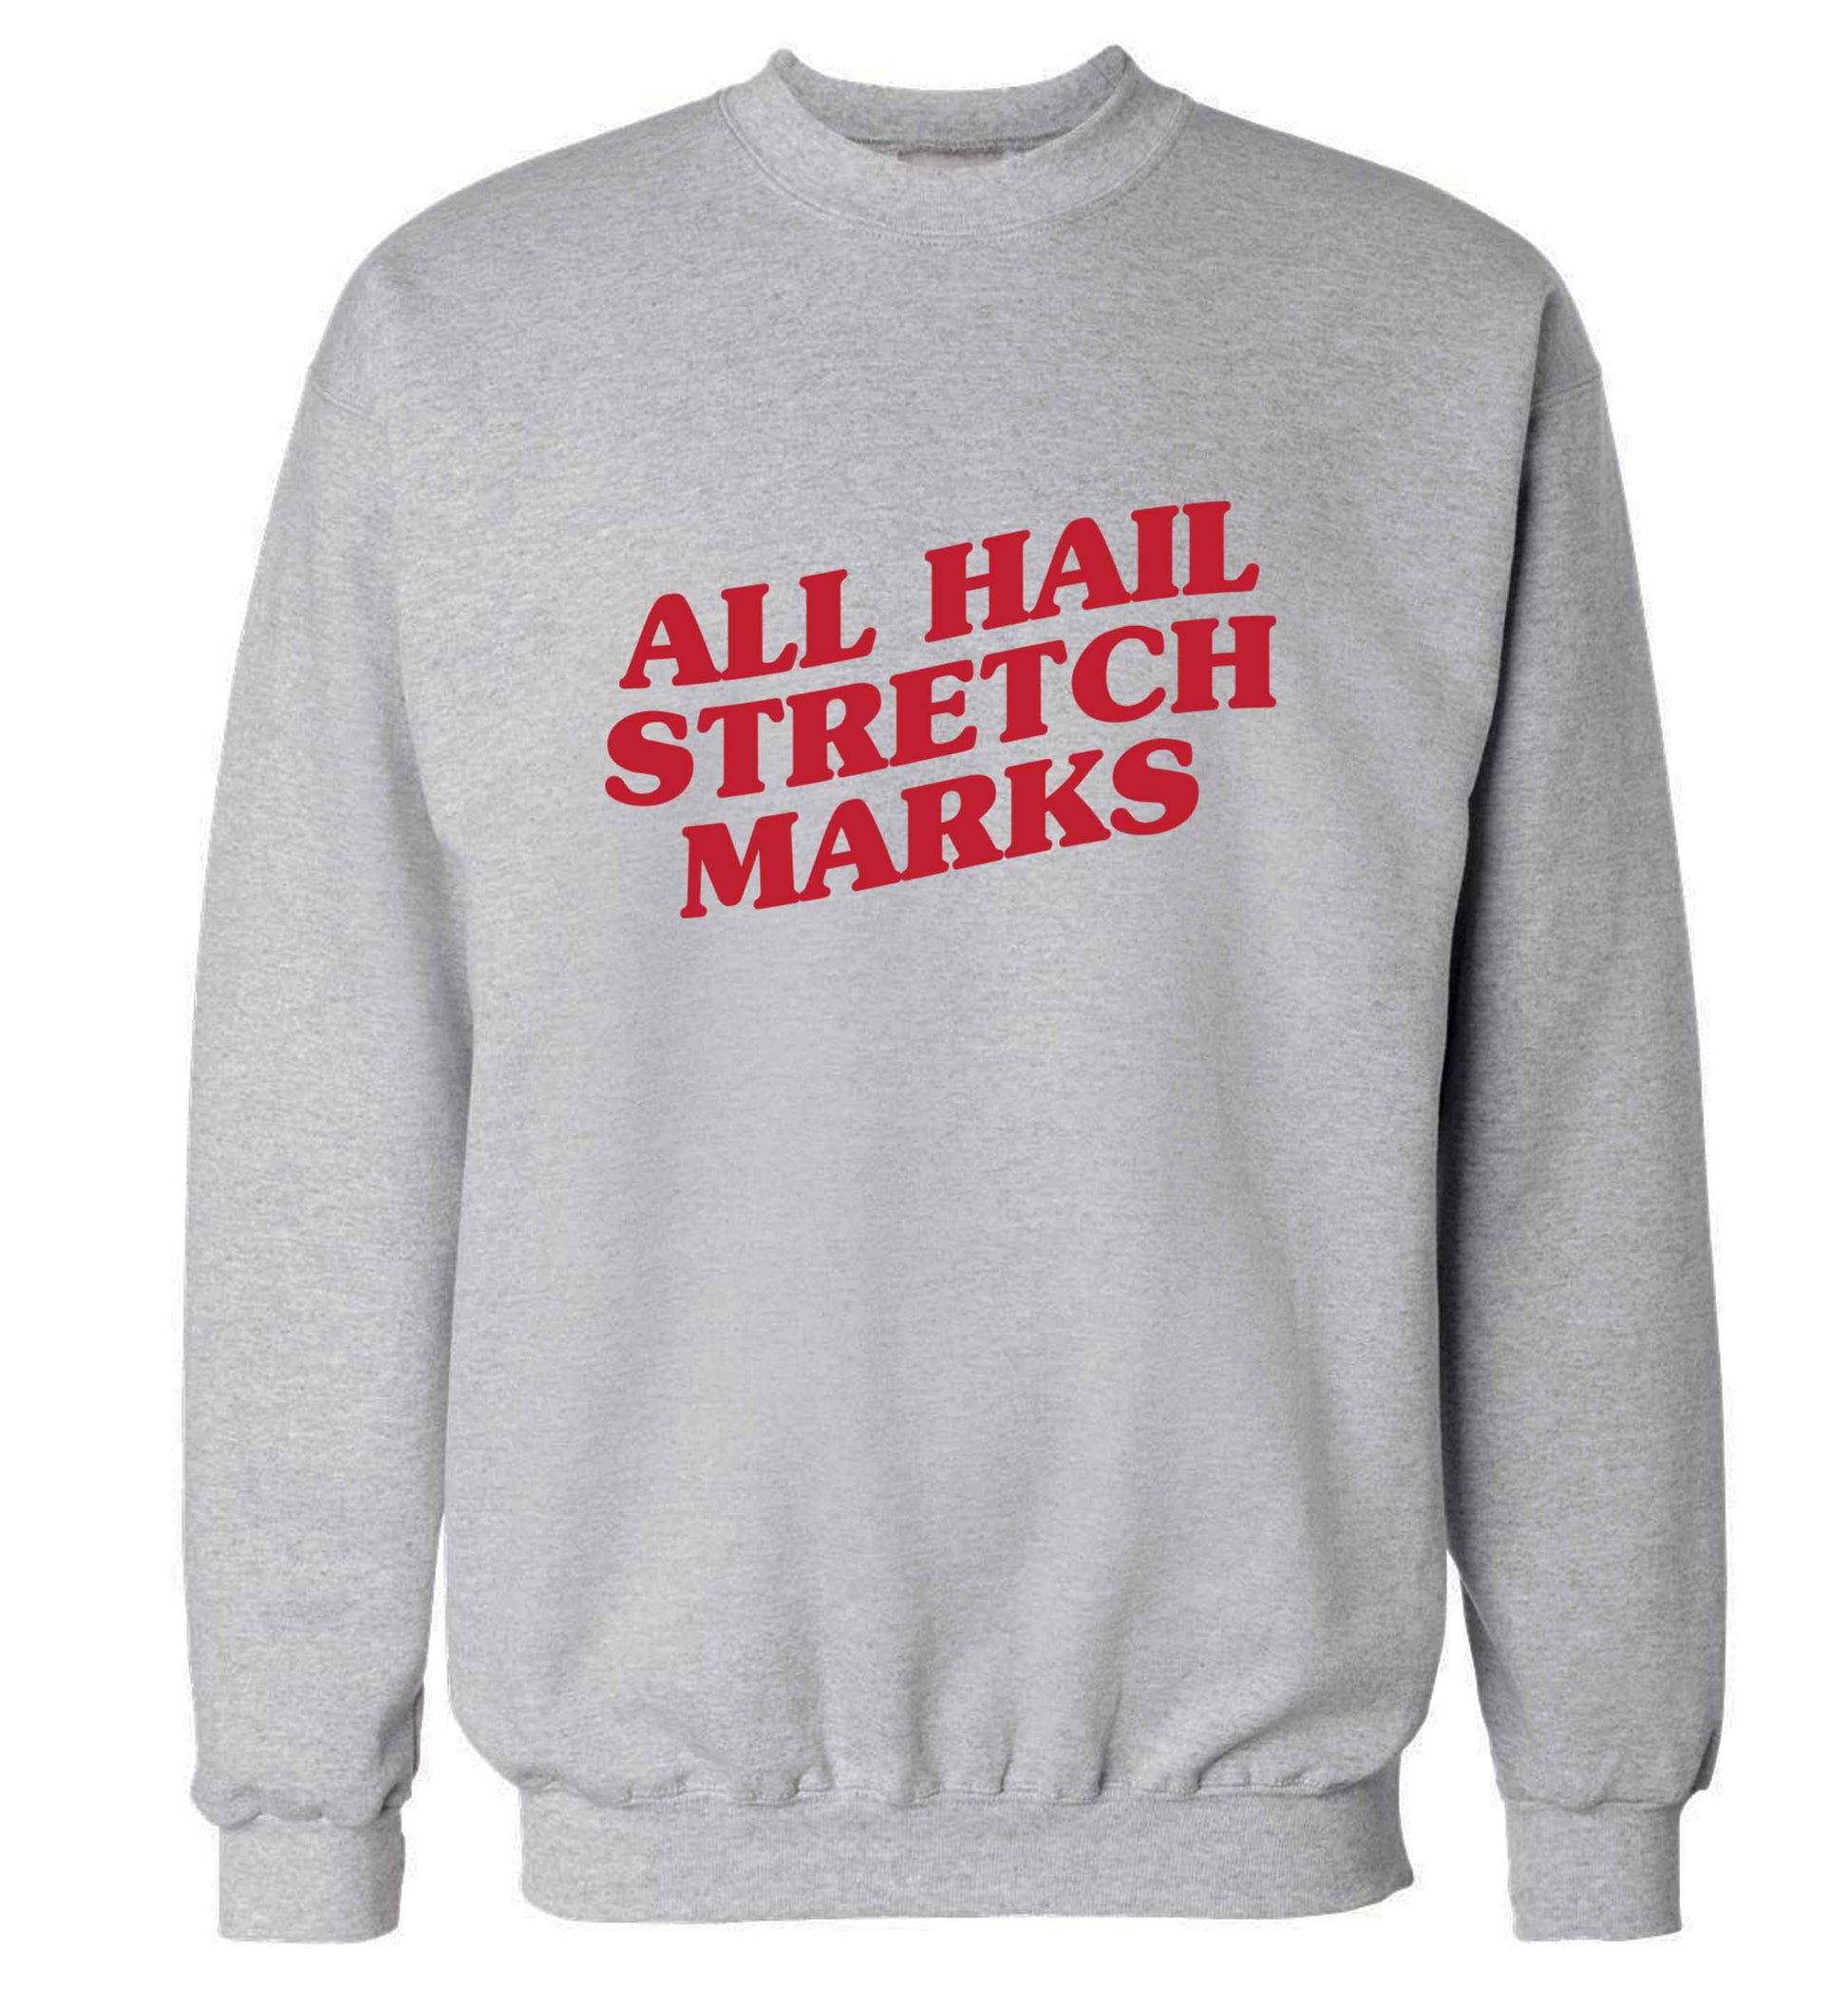 All hail stretch marks adult's unisex grey sweater 2XL